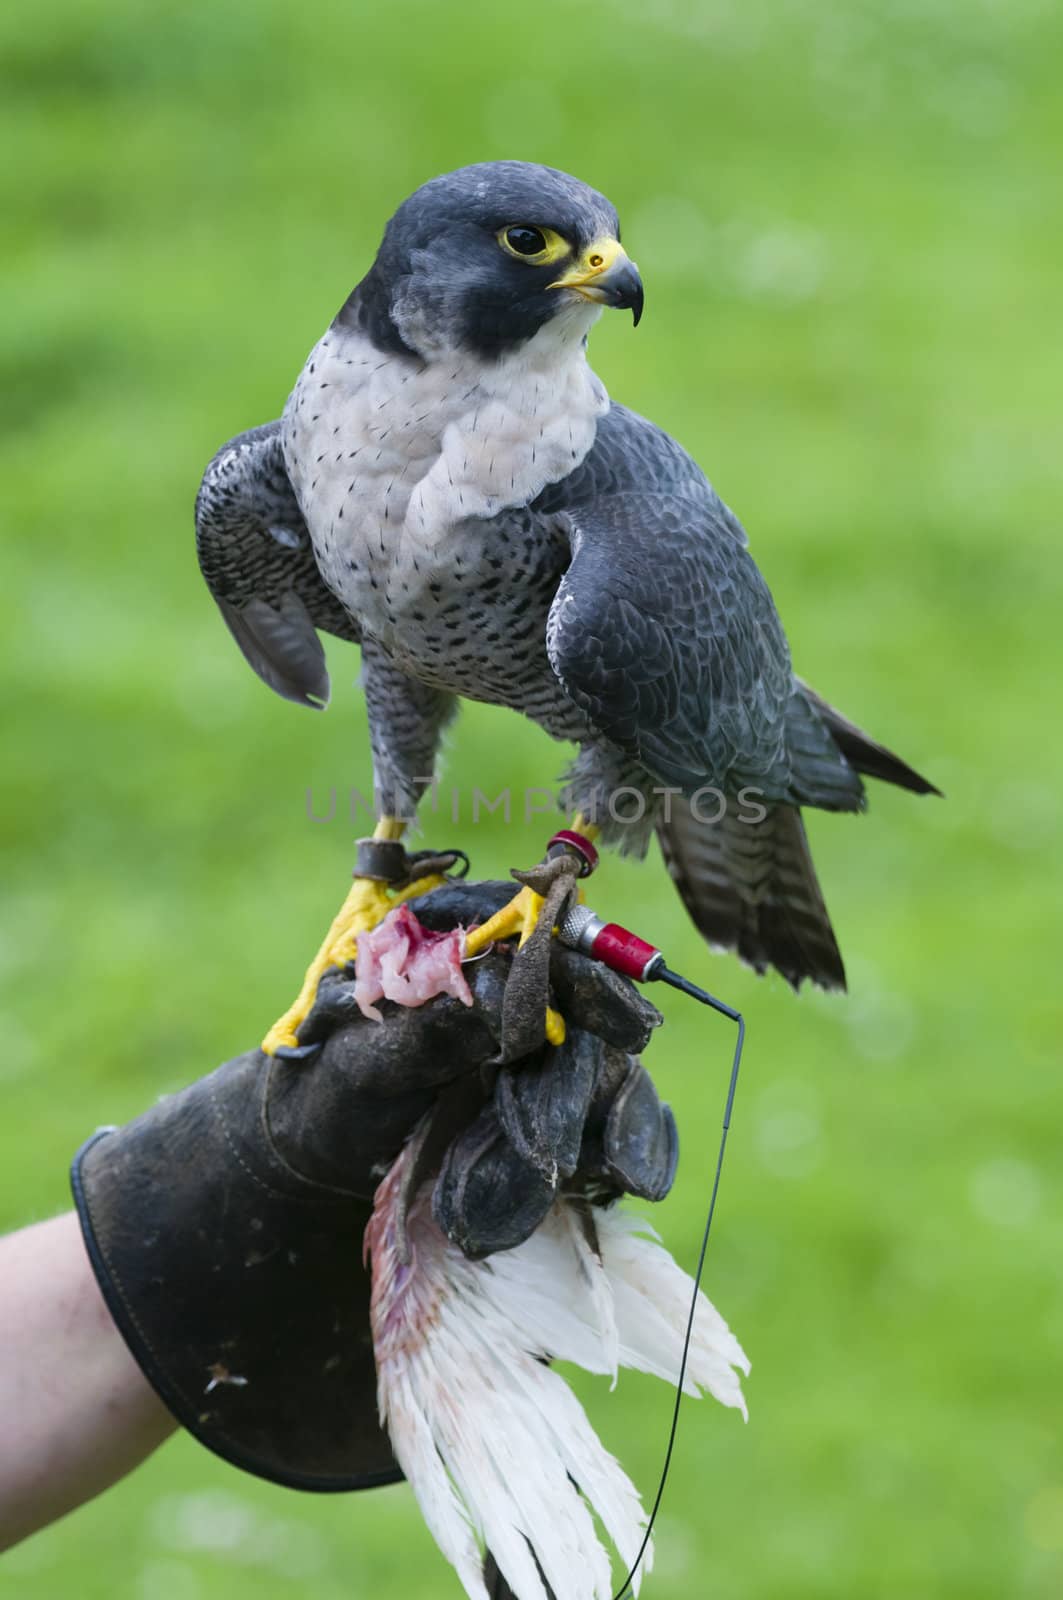 Peregrine Falcon (Falco peregrinus), also known as Duck Hawk is a bird of prey in the family Falconidae.